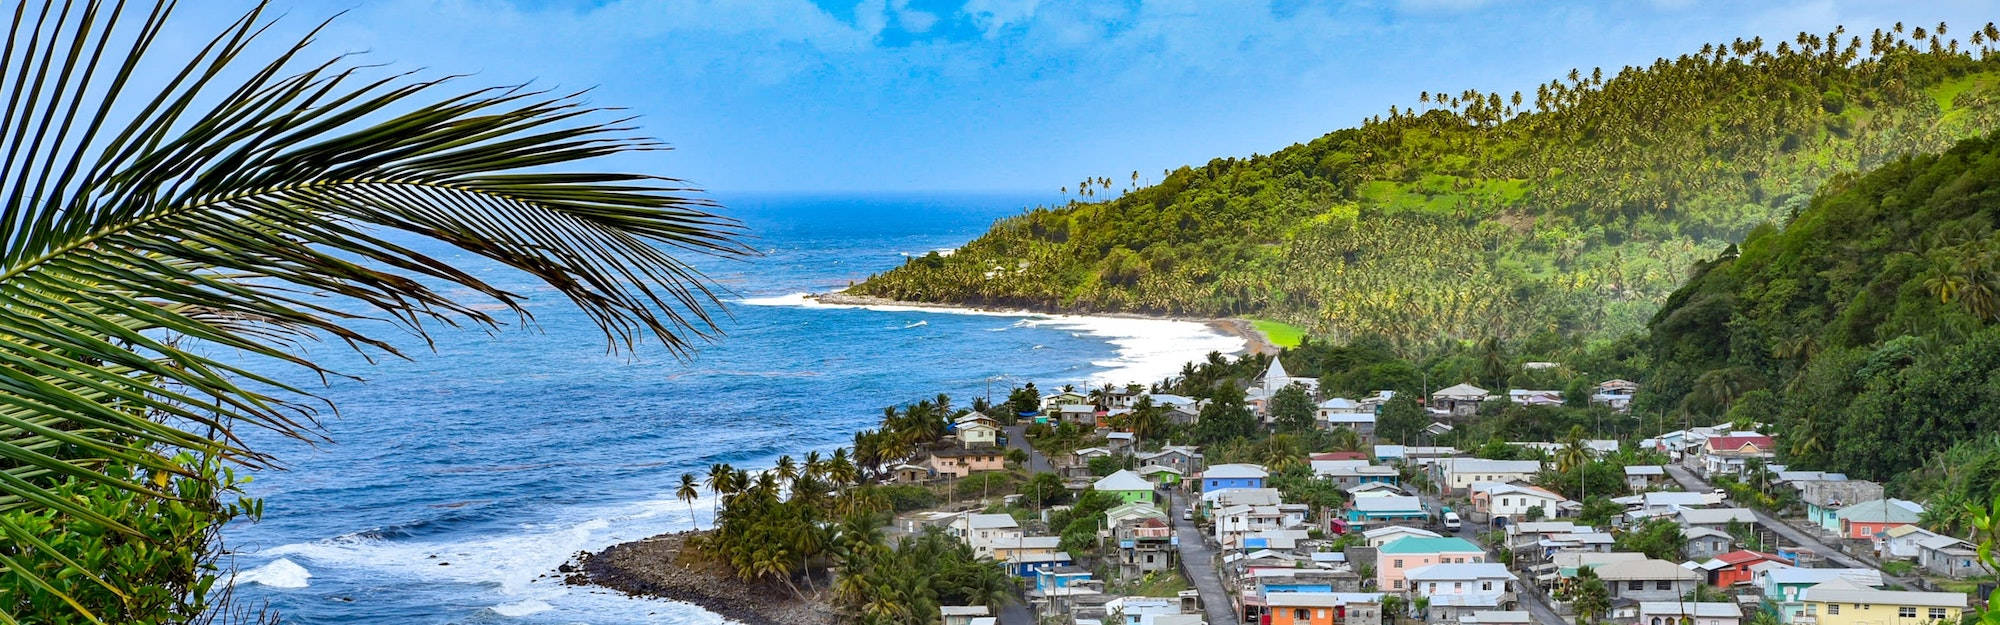 St Vincent And The Grenadines Town Wallpaper